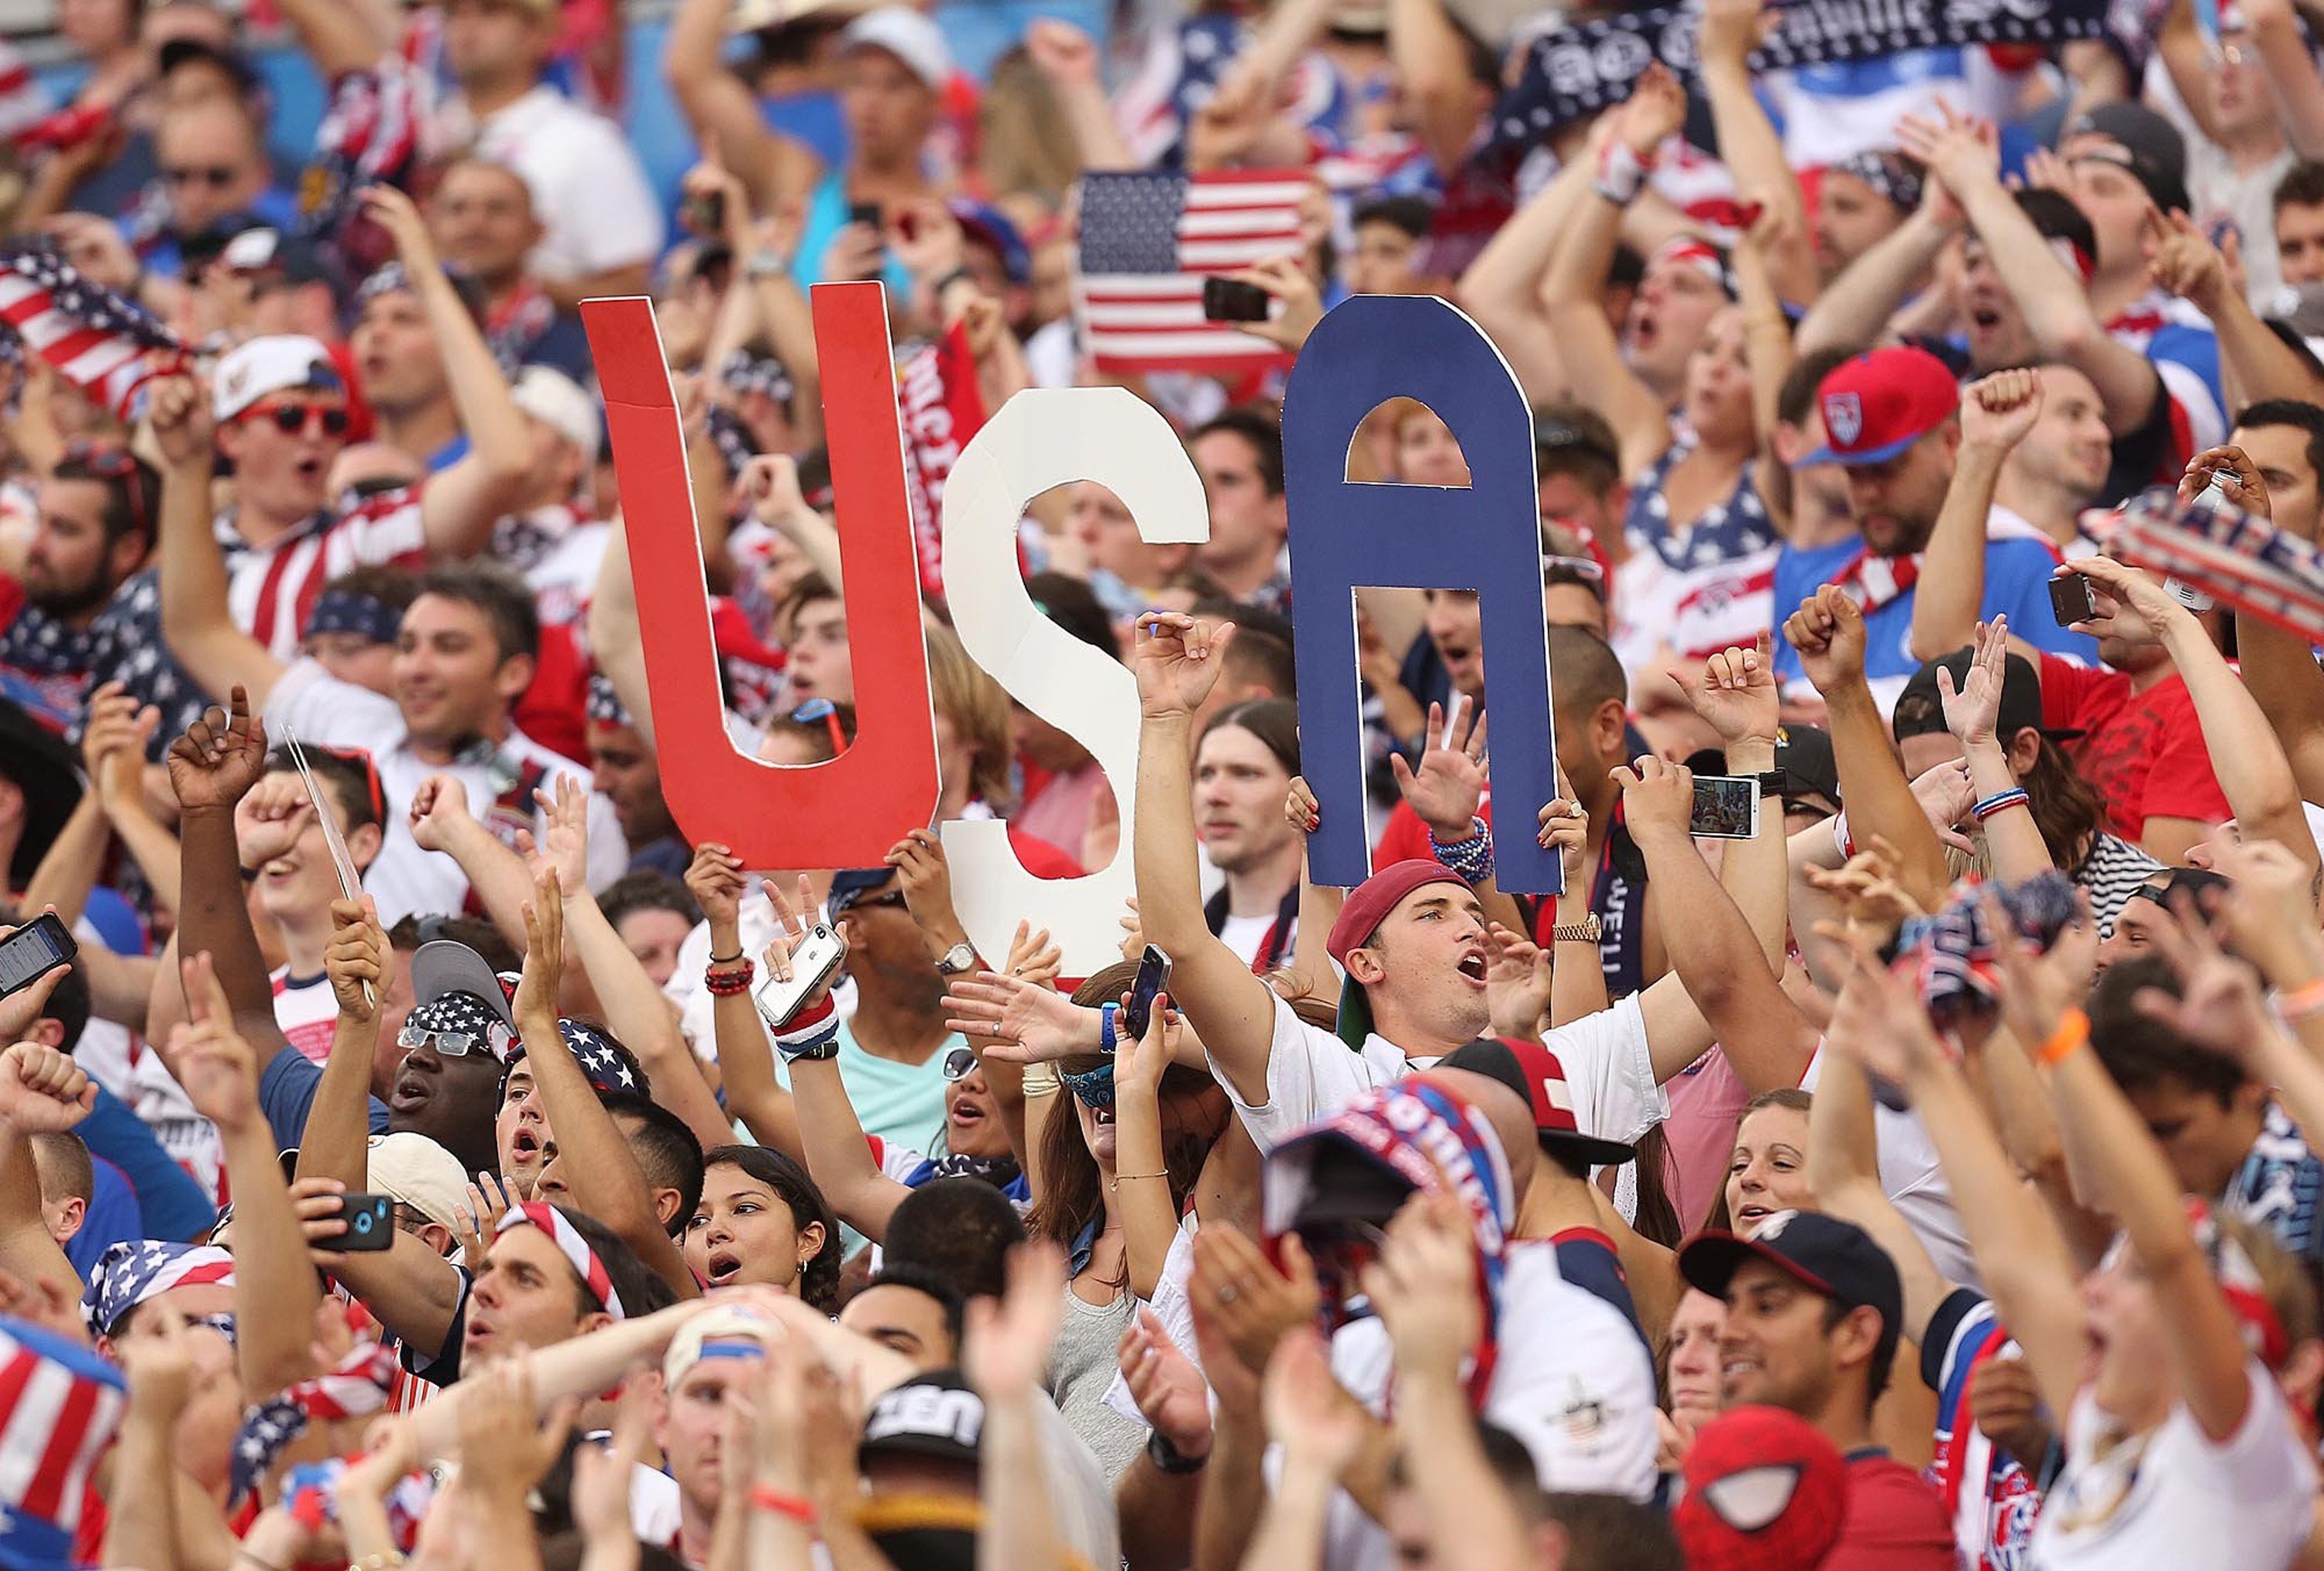 Fans celebrate during the United States' 2-1 win against Nigeria in a friendly in preparation for the World Cup, at EverBank Field in Jacksonville, Fla., on Saturday, June 7, 2014. (Stephen M. Dowell—Orlando Sentinel/MCT/ Getty Images)